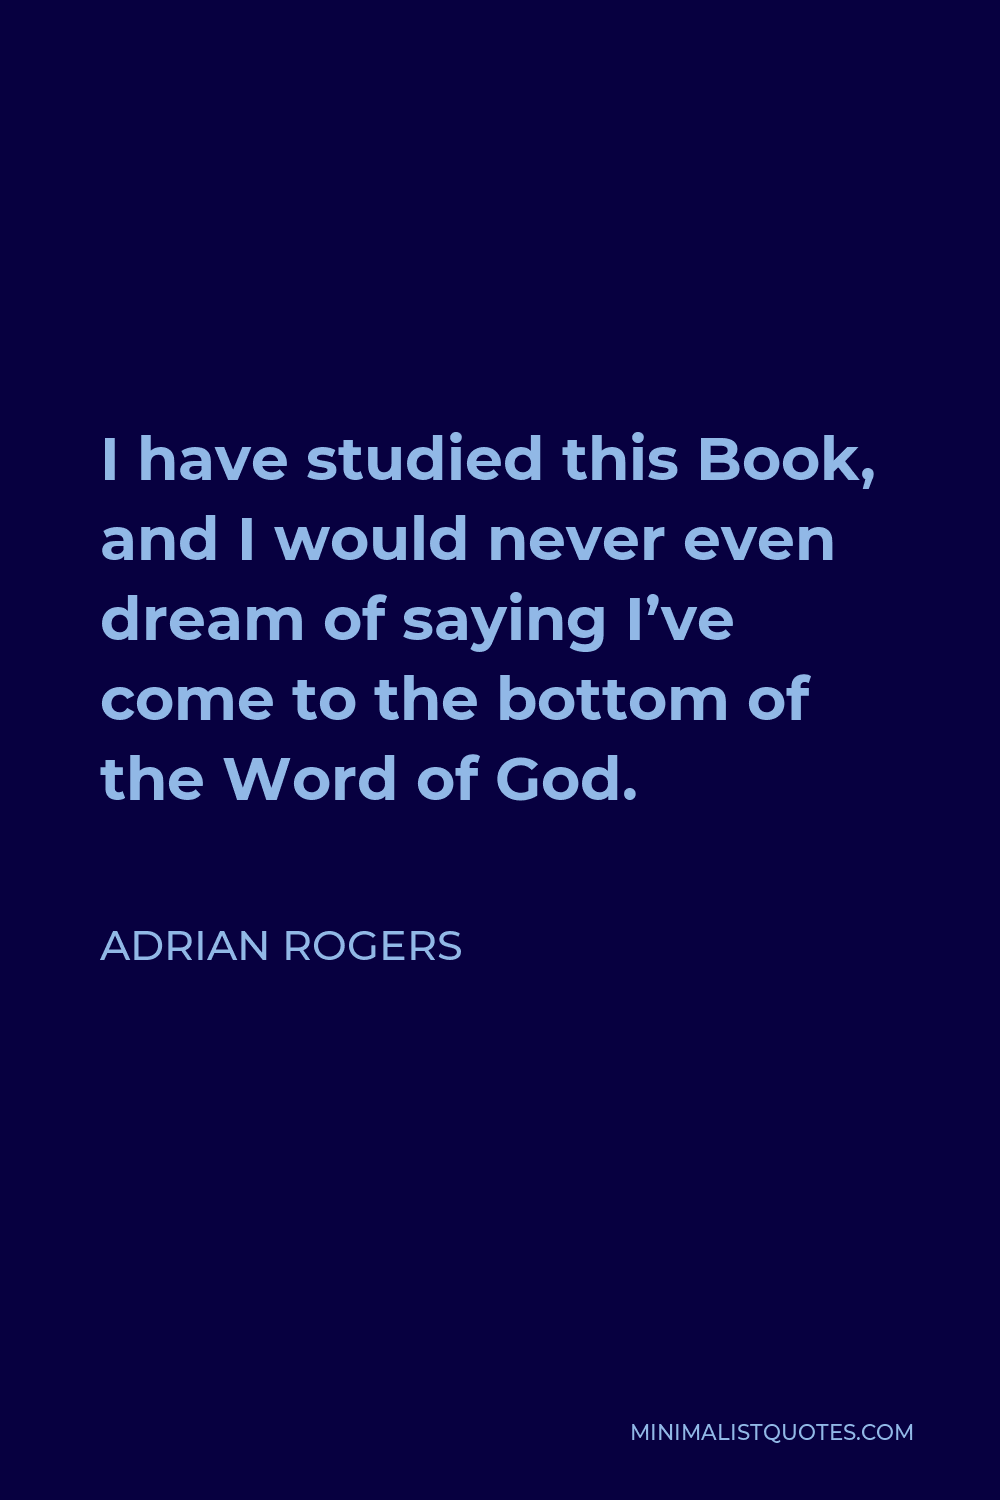 Adrian Rogers Quote - I have studied this Book, and I would never even dream of saying I’ve come to the bottom of the Word of God.